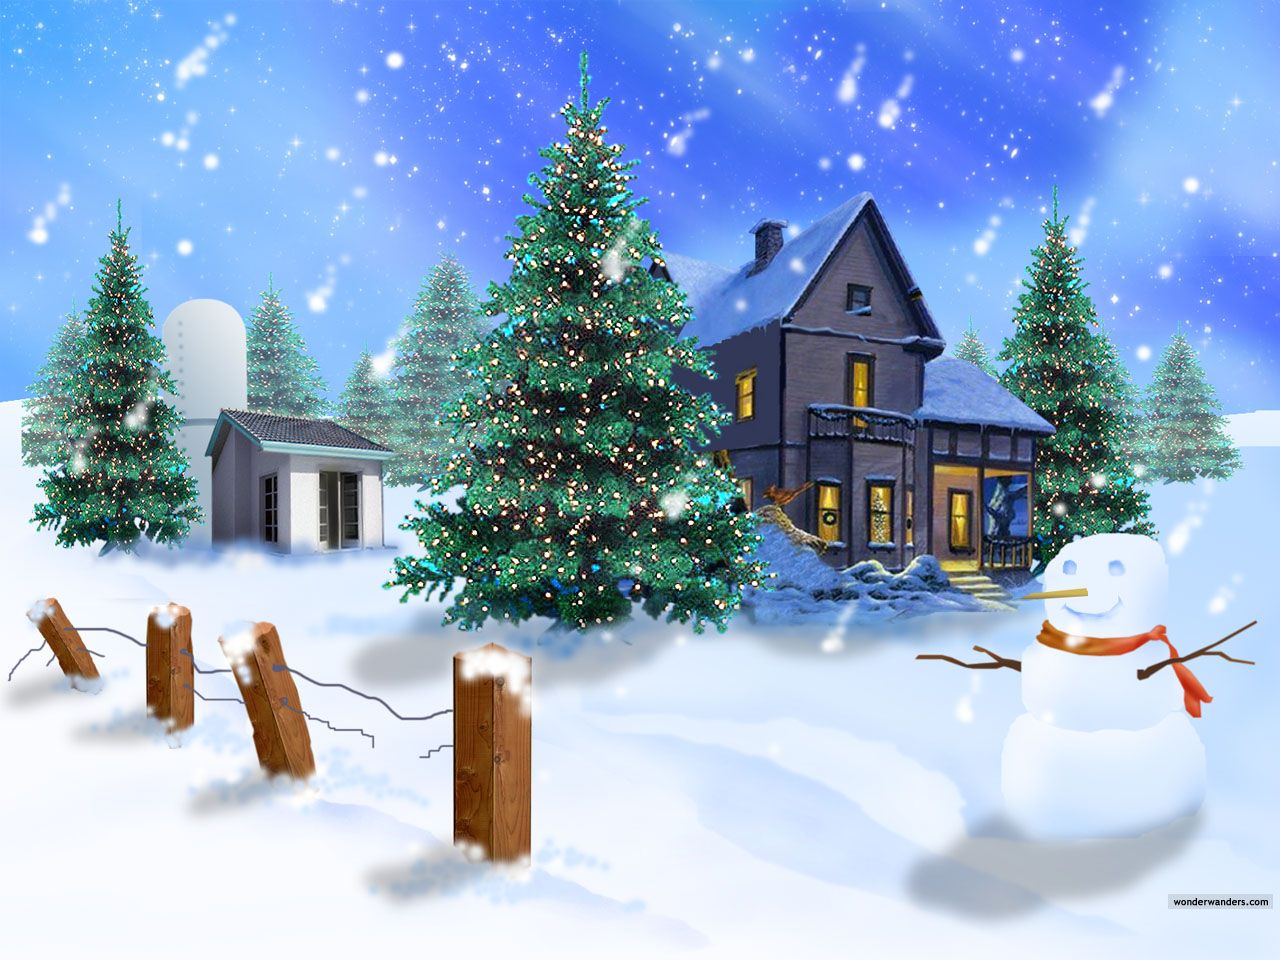 Christmas graphic art wallpaper picture